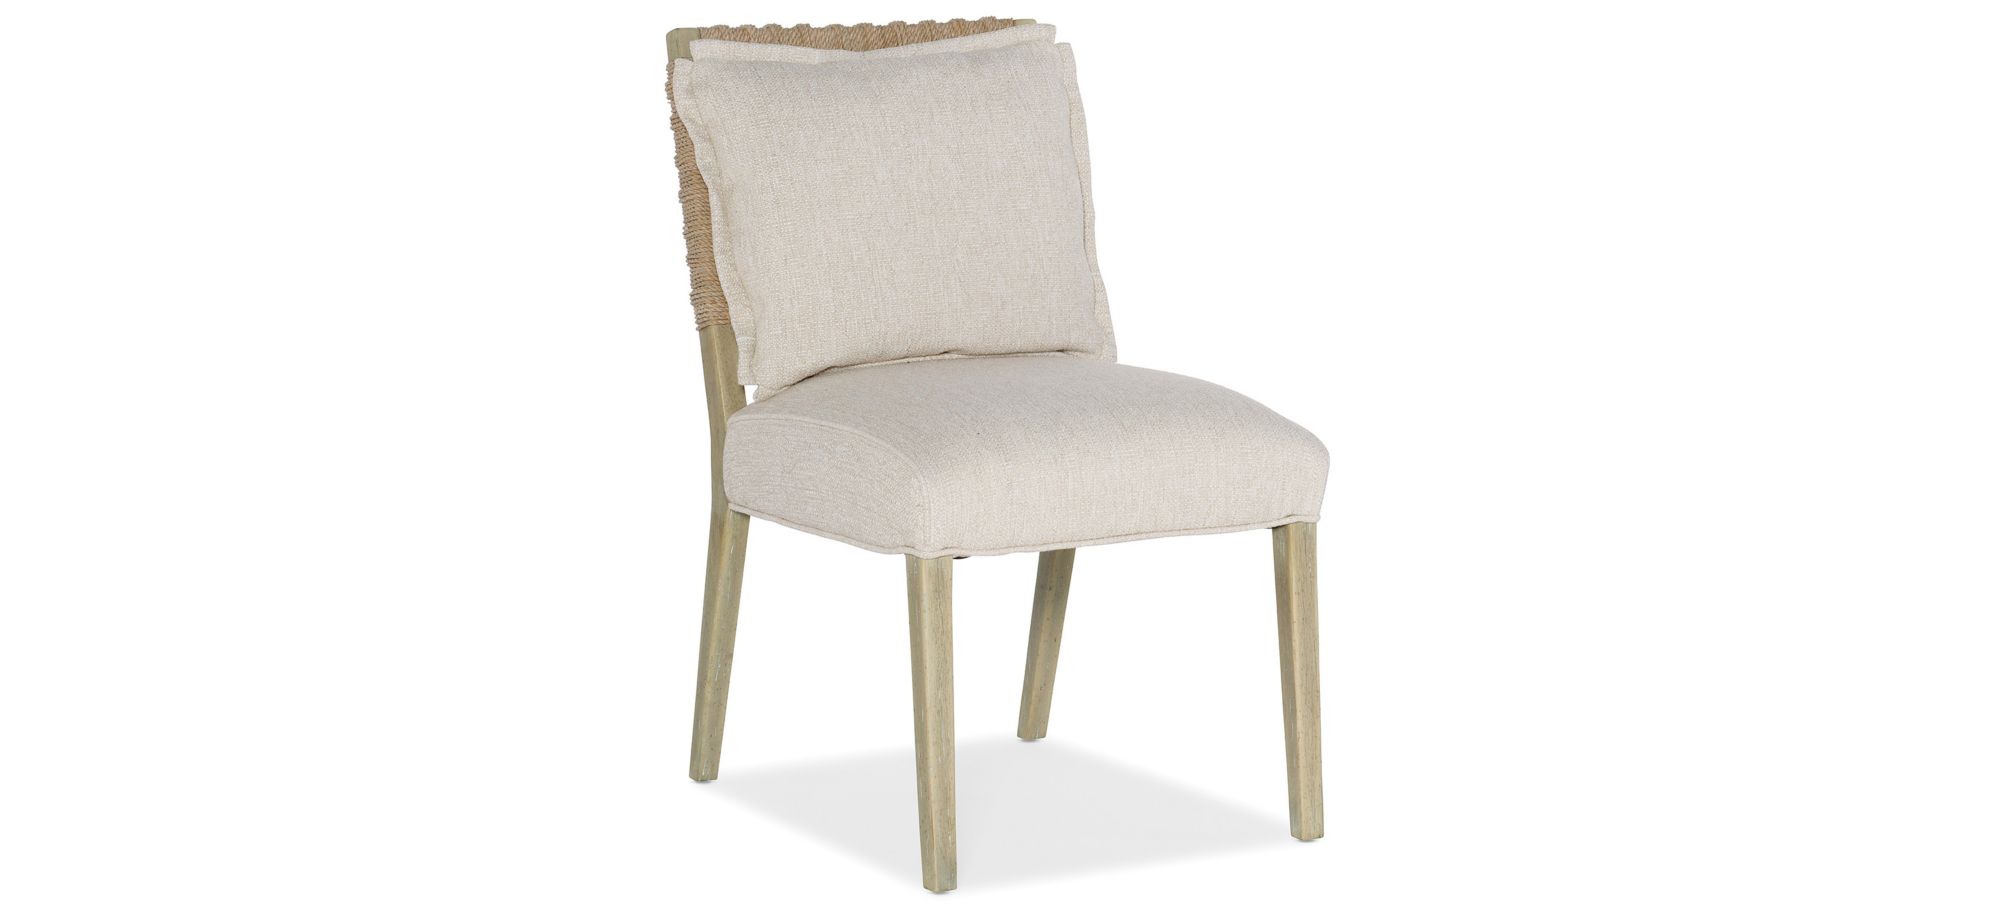 Surfrider Woven Back Side Chair - Set of 2 in Driftwood by Hooker Furniture